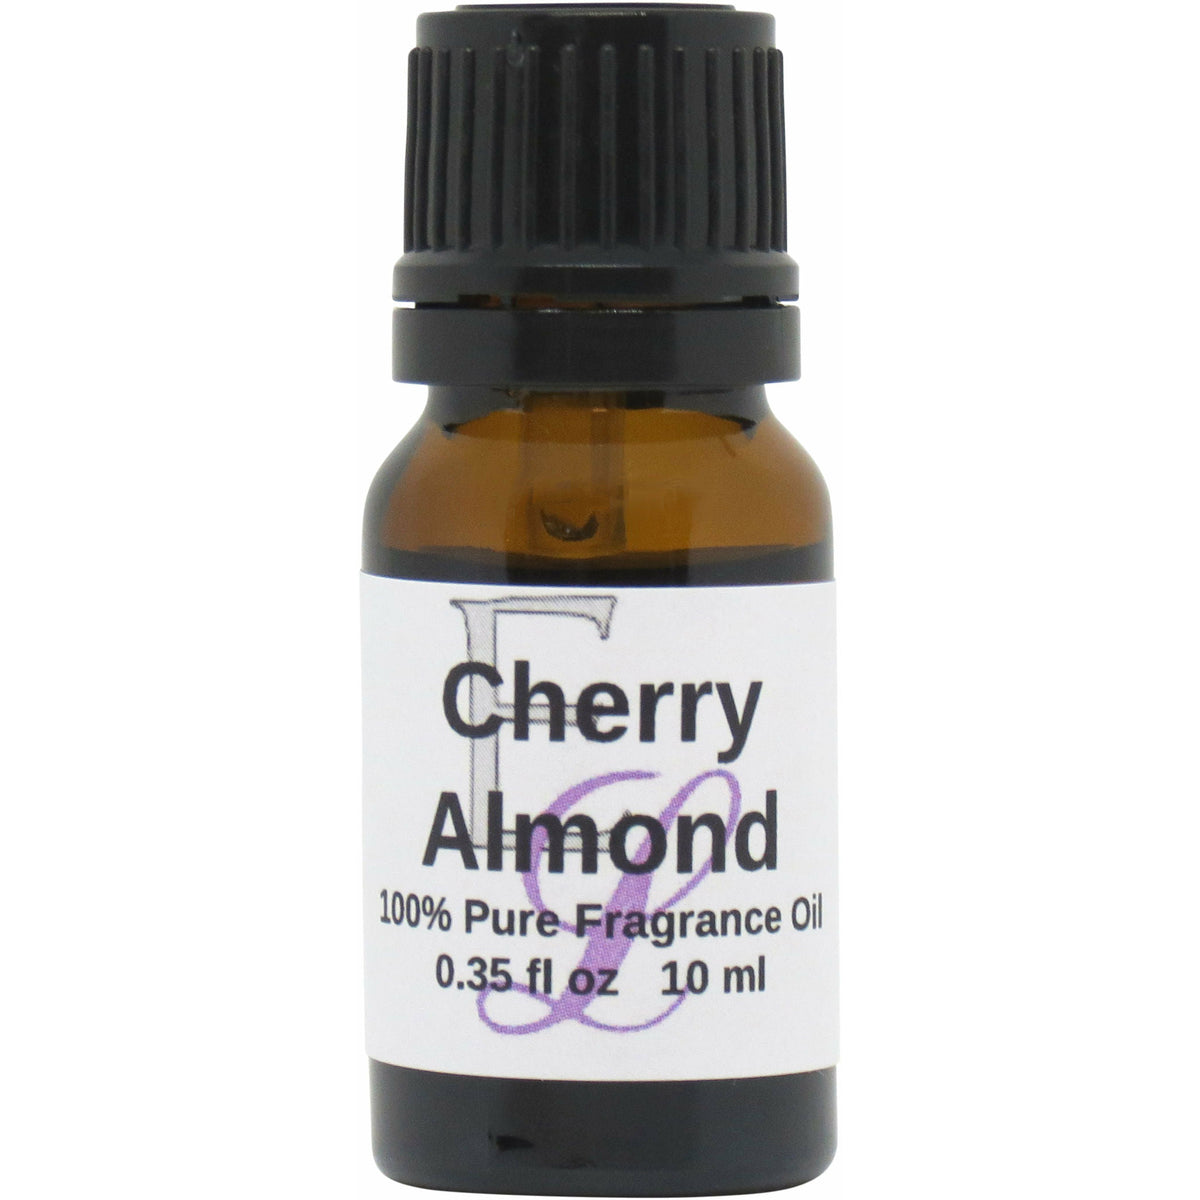 Cherry Almond Fragrance Oil, 10 ml Premium, Long Lasting Diffuser Oils –  Eclectic Lady